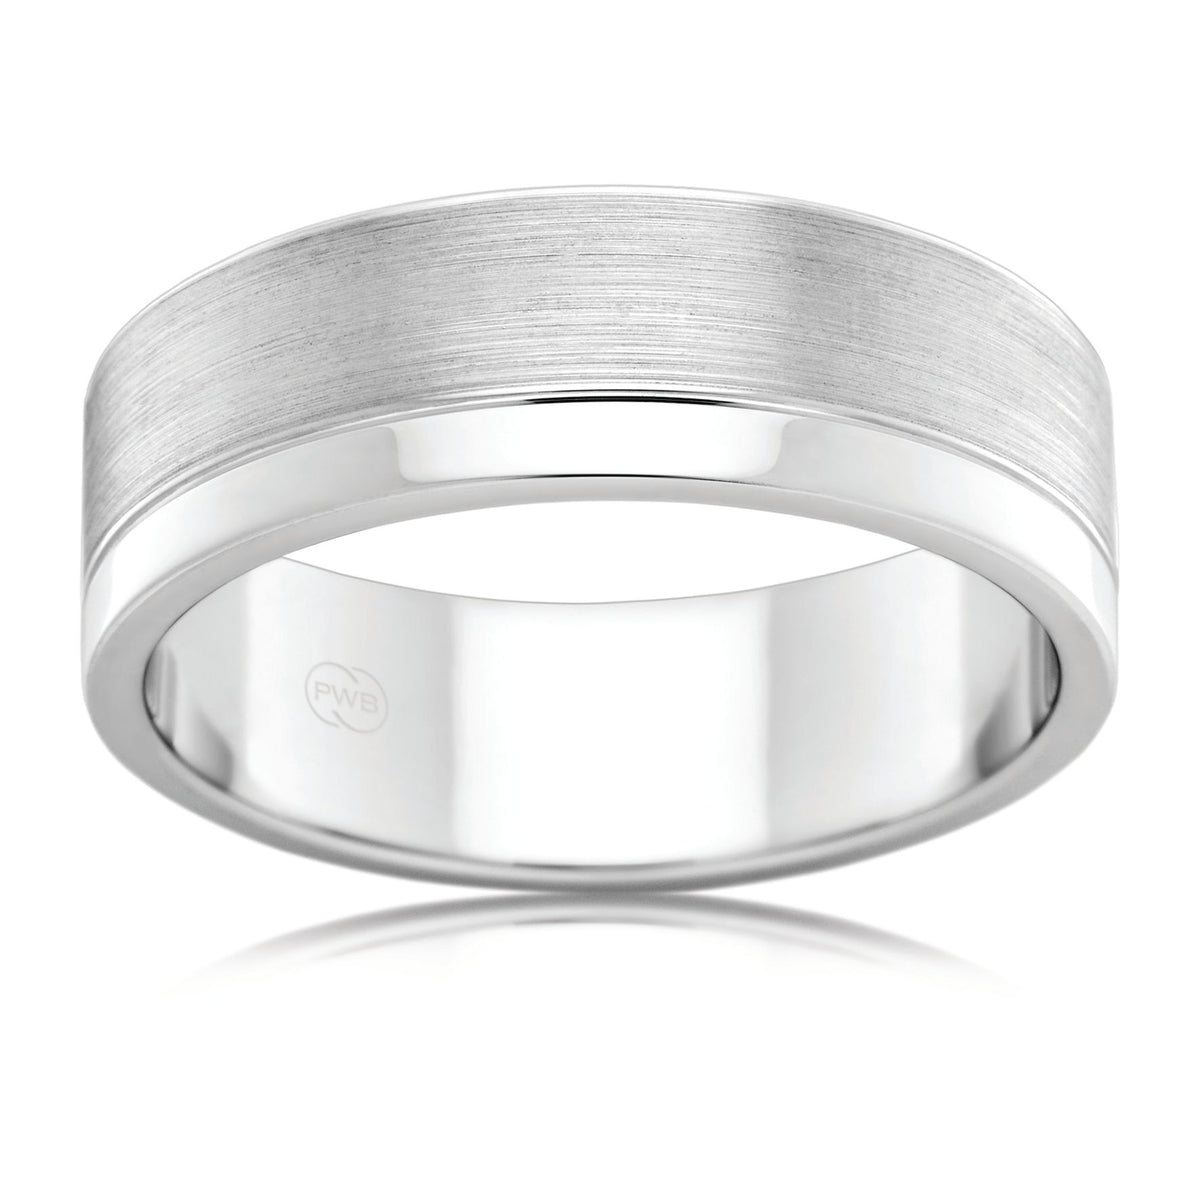 9ct White Gold 7mm Faceted Wedding Ring - Duffs Jewellers